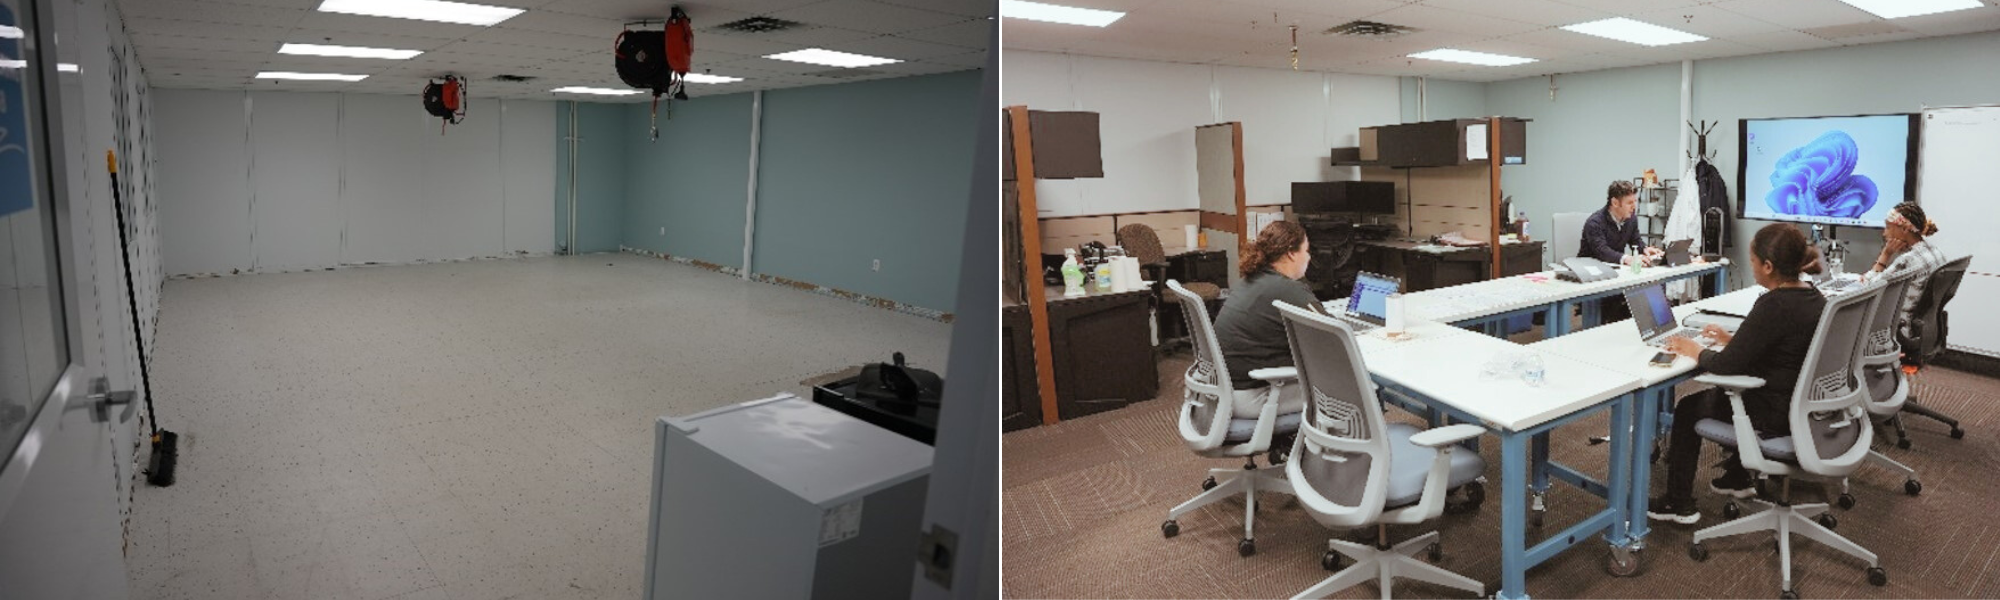 Before & After Training Room